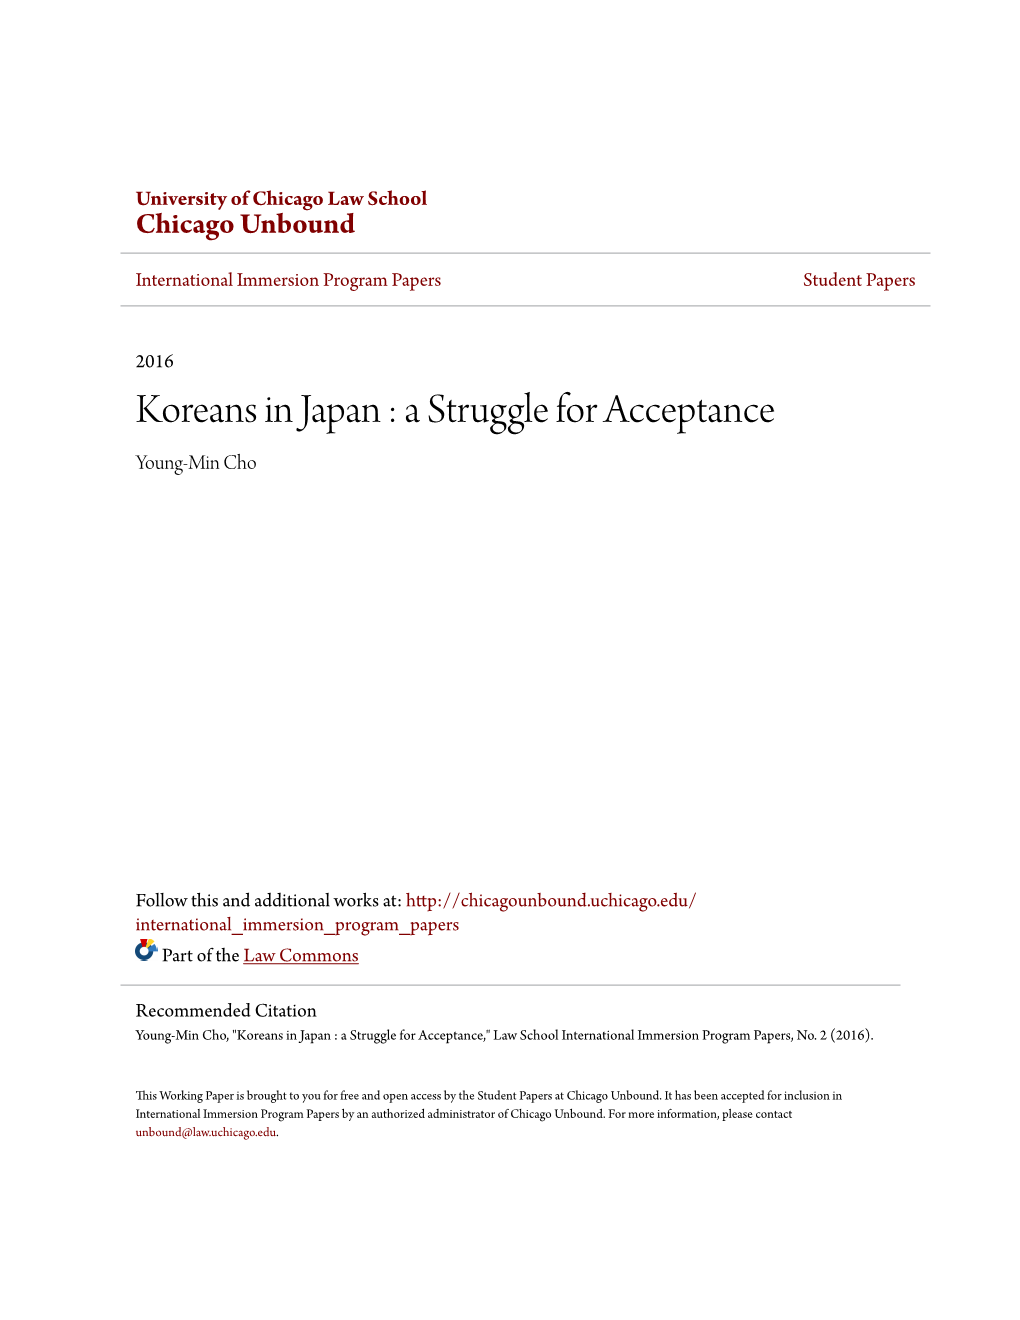 Koreans in Japan : a Struggle for Acceptance Young-Min Cho